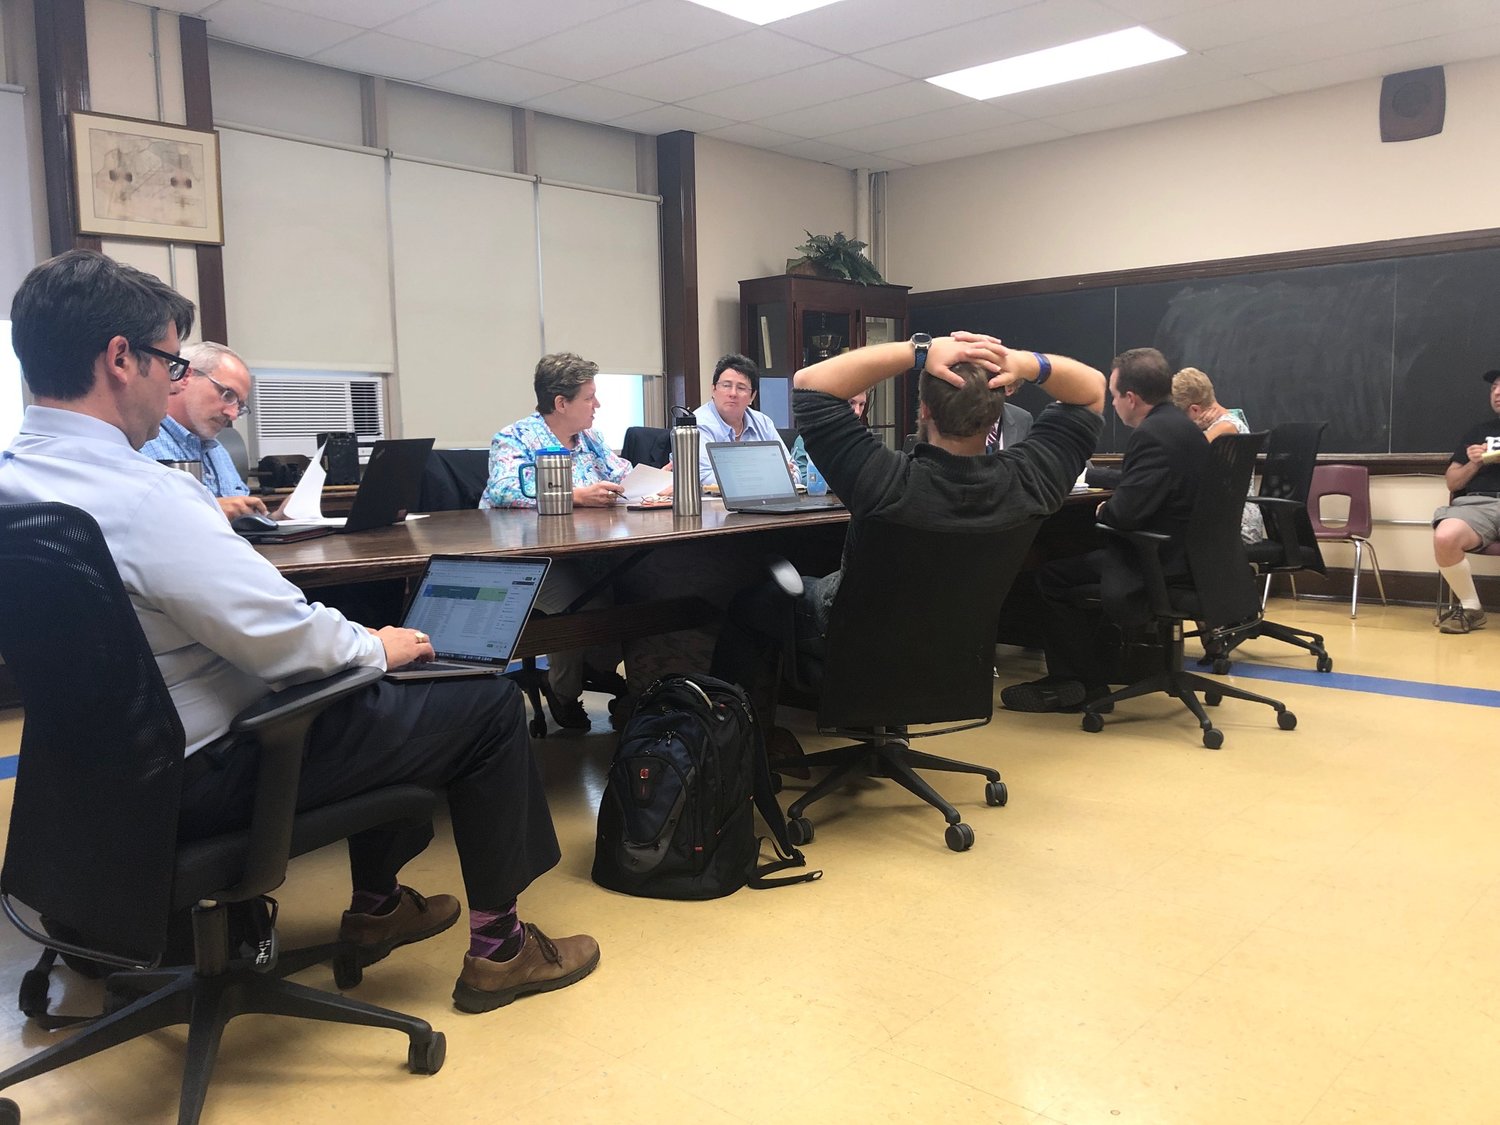 DELIBERATING: The Warwick School Committee discussed its new policies to cut down distractions within the classroom at their recent meeting on Aug. 29 at the Gorton Administration building.